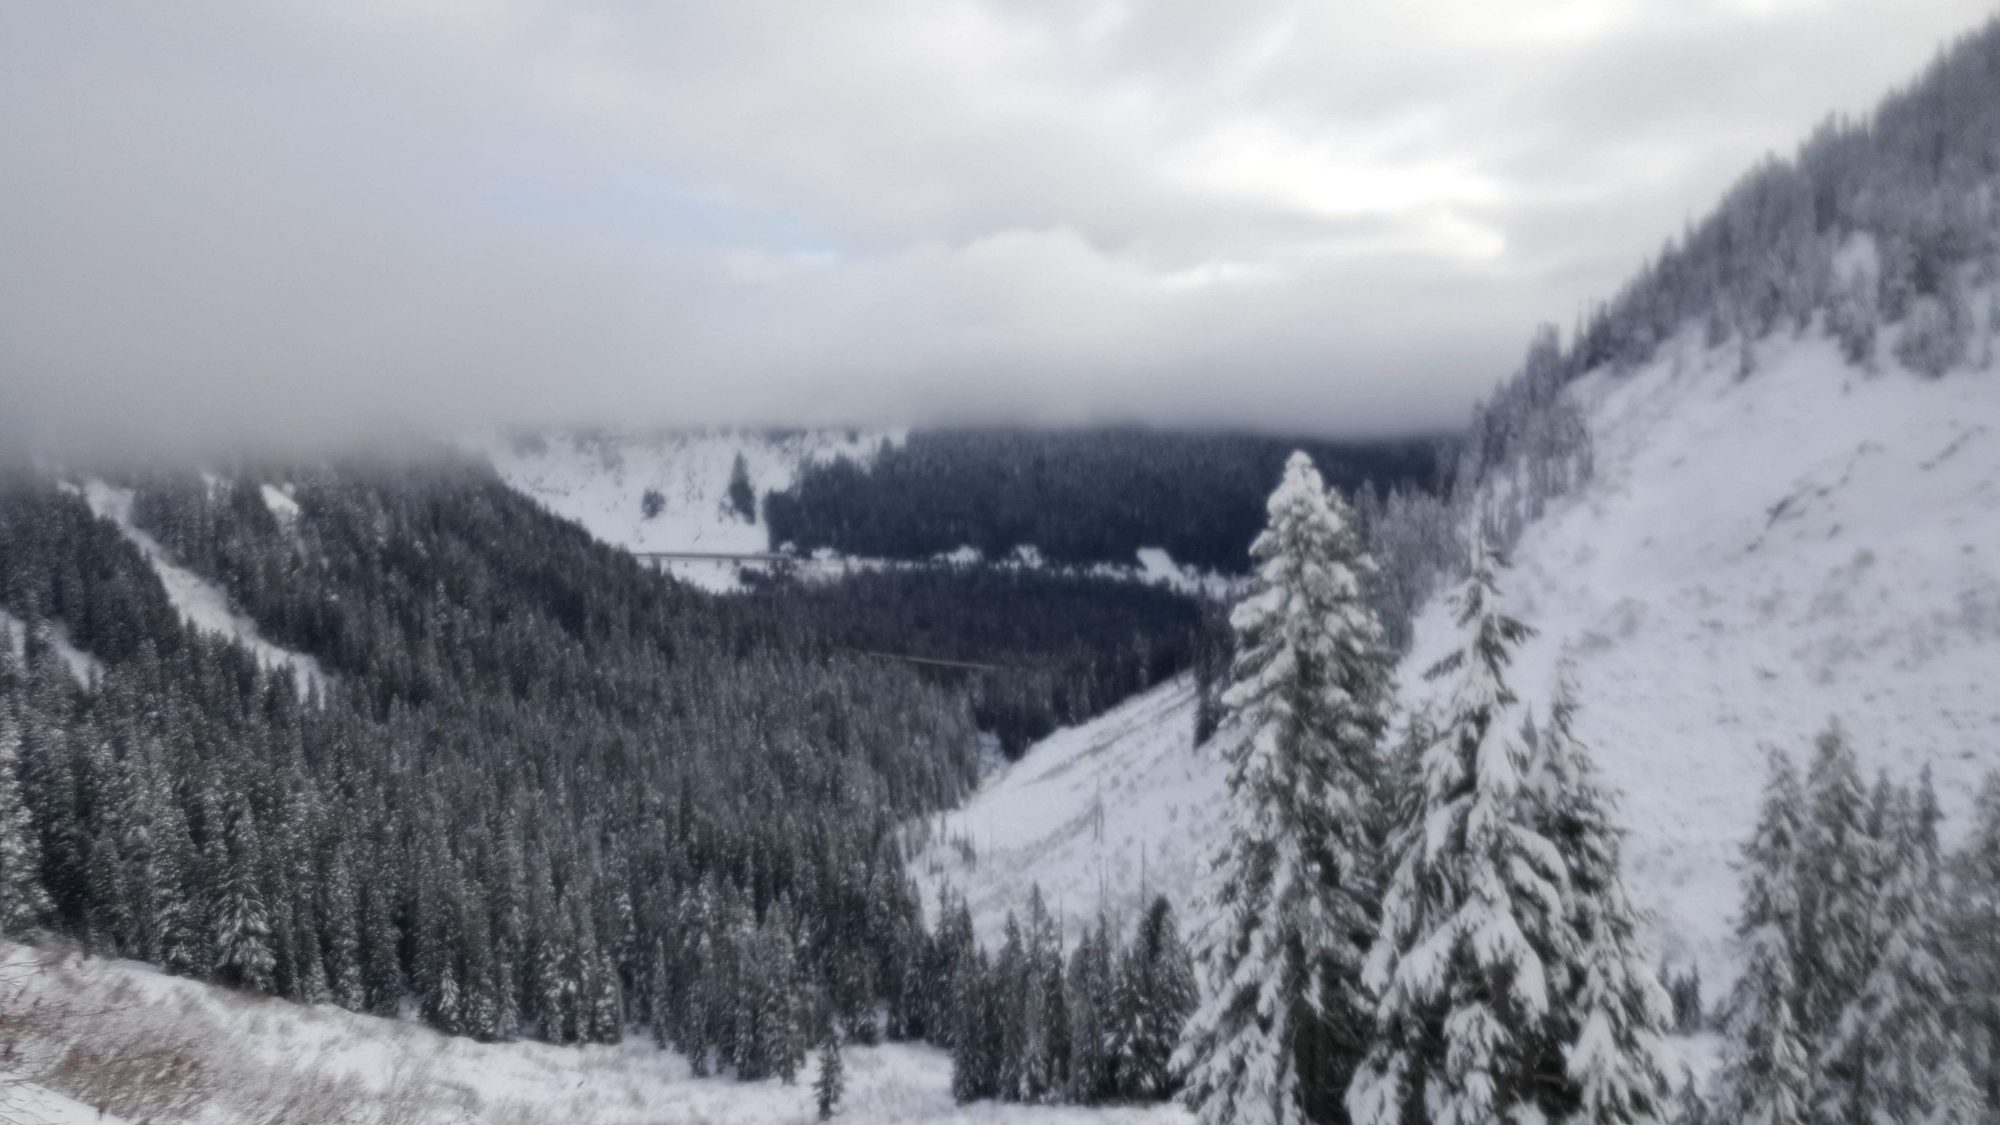 I90 from low mountain denny creek snowshoe